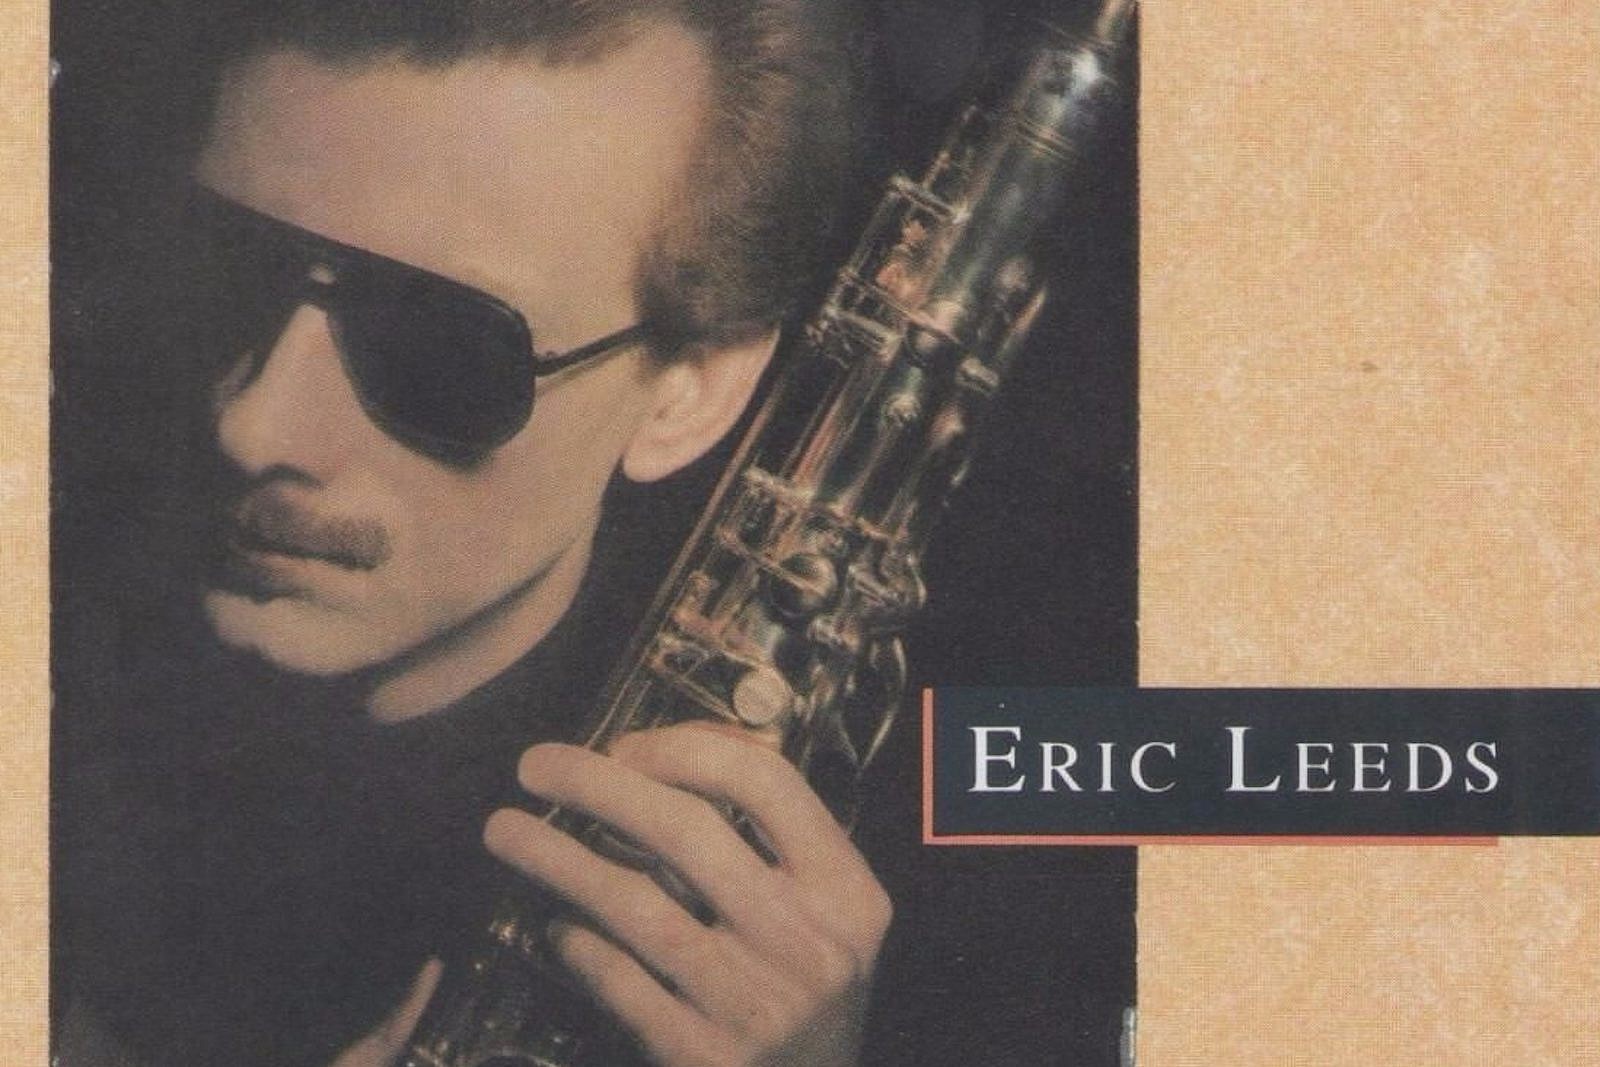 How Eric Leeds' 'Times Squared' Became an Accidental Solo Debut